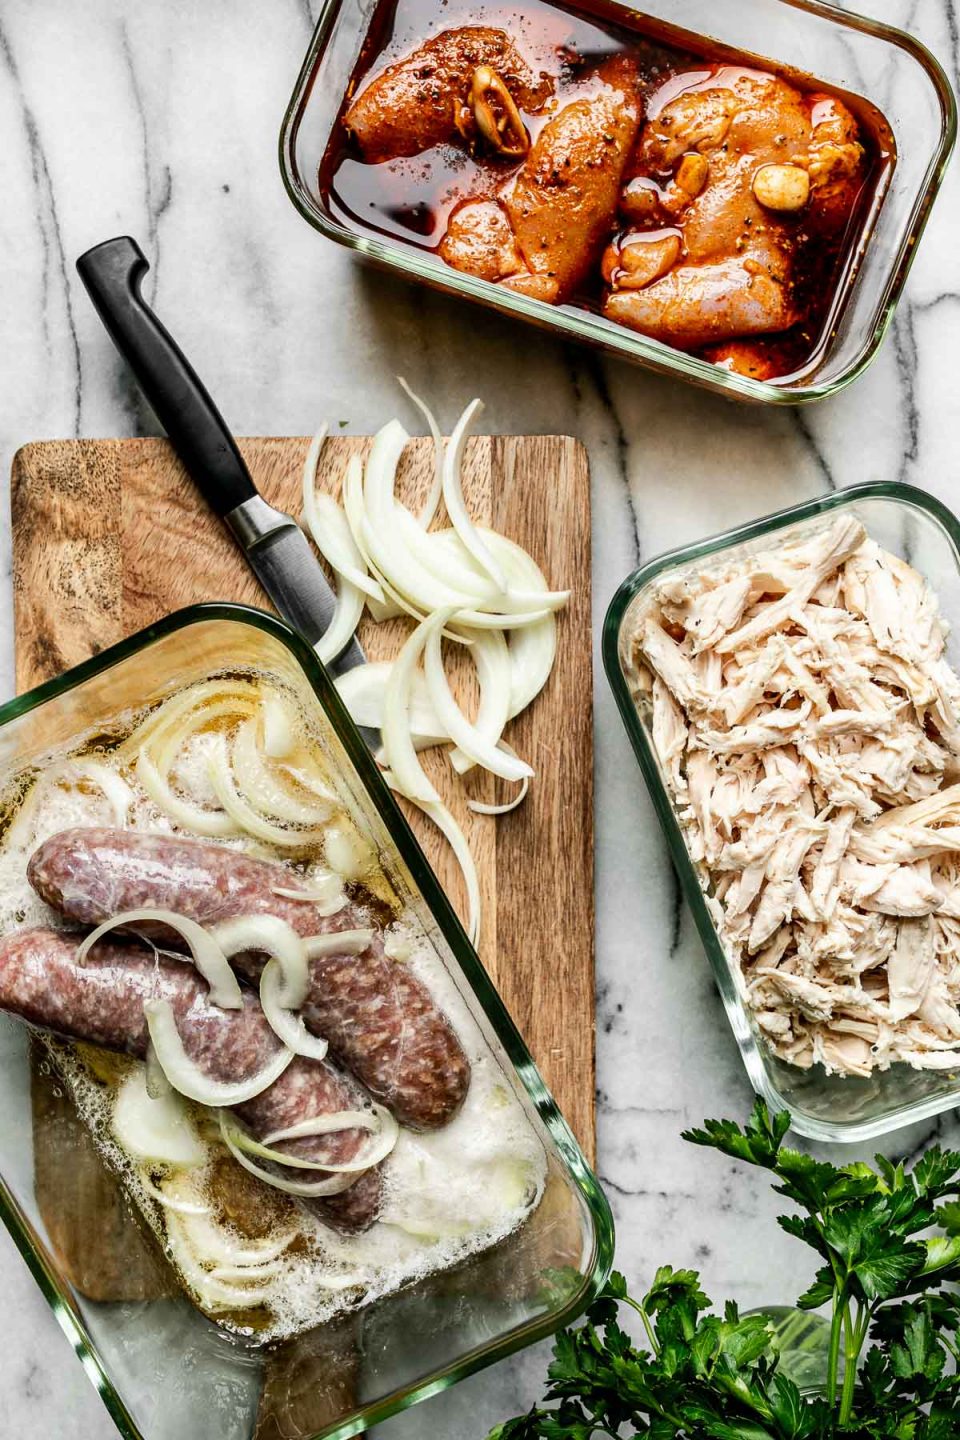 Mise en Place with Zwilling Fresh & Save. Zwilling Fresh & Save containers sit atop a white marble surface, filled with marinating chicken shawarma, shredded chicken breast, & marinating beer brats. The containers are surrounded by sliced onions & a bowl of fresh parsley.